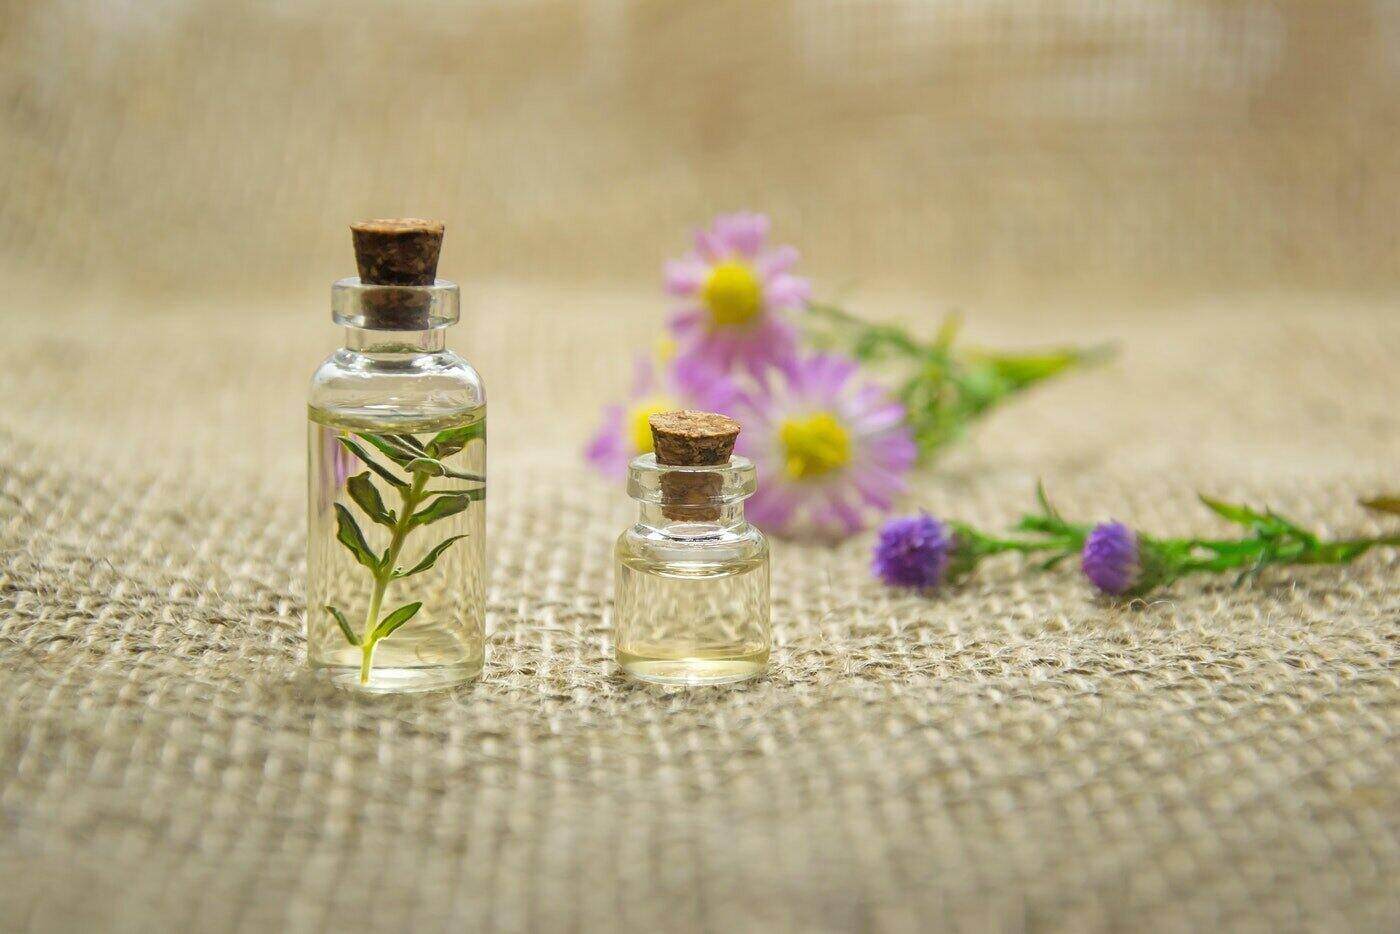 5 Best Edens Garden Essential Oils Review Buying Guide The Florist Guide